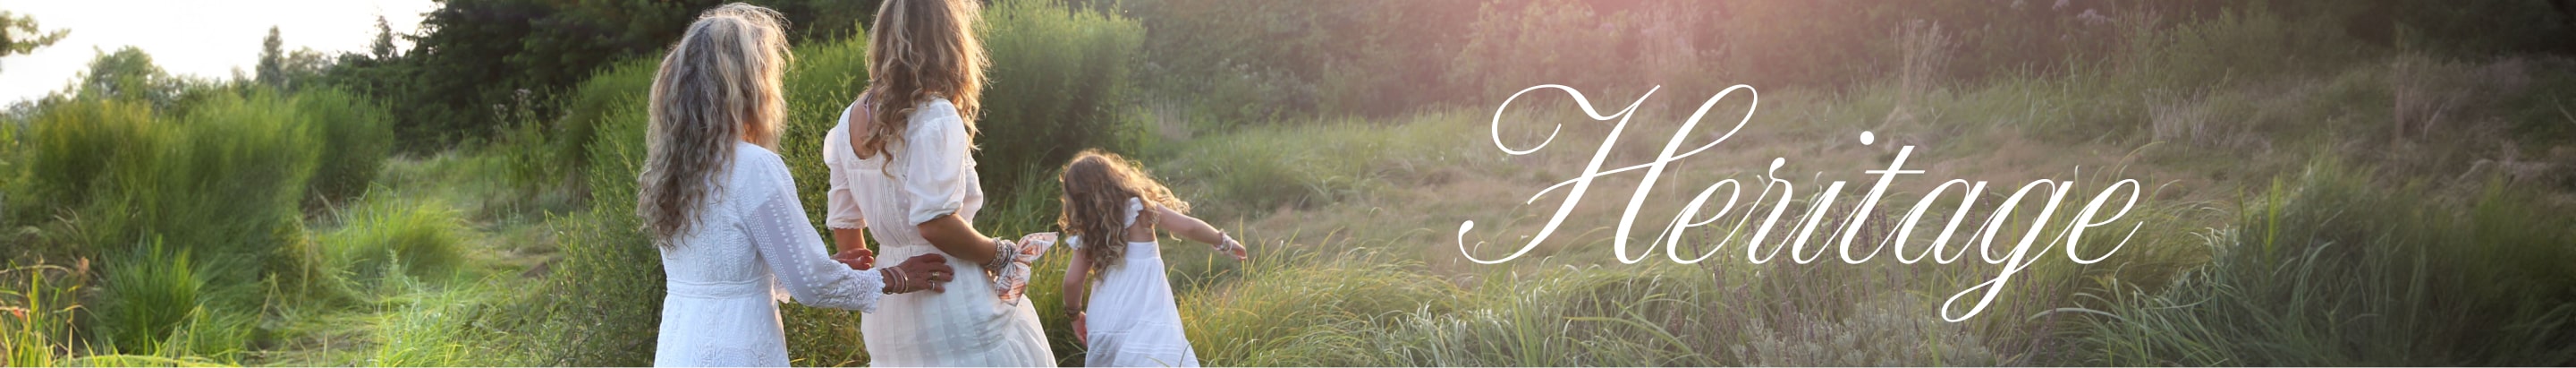 The LoveShackFancy founder walking in a field with her daughters, all wearing white dresses from the Heritage Collection